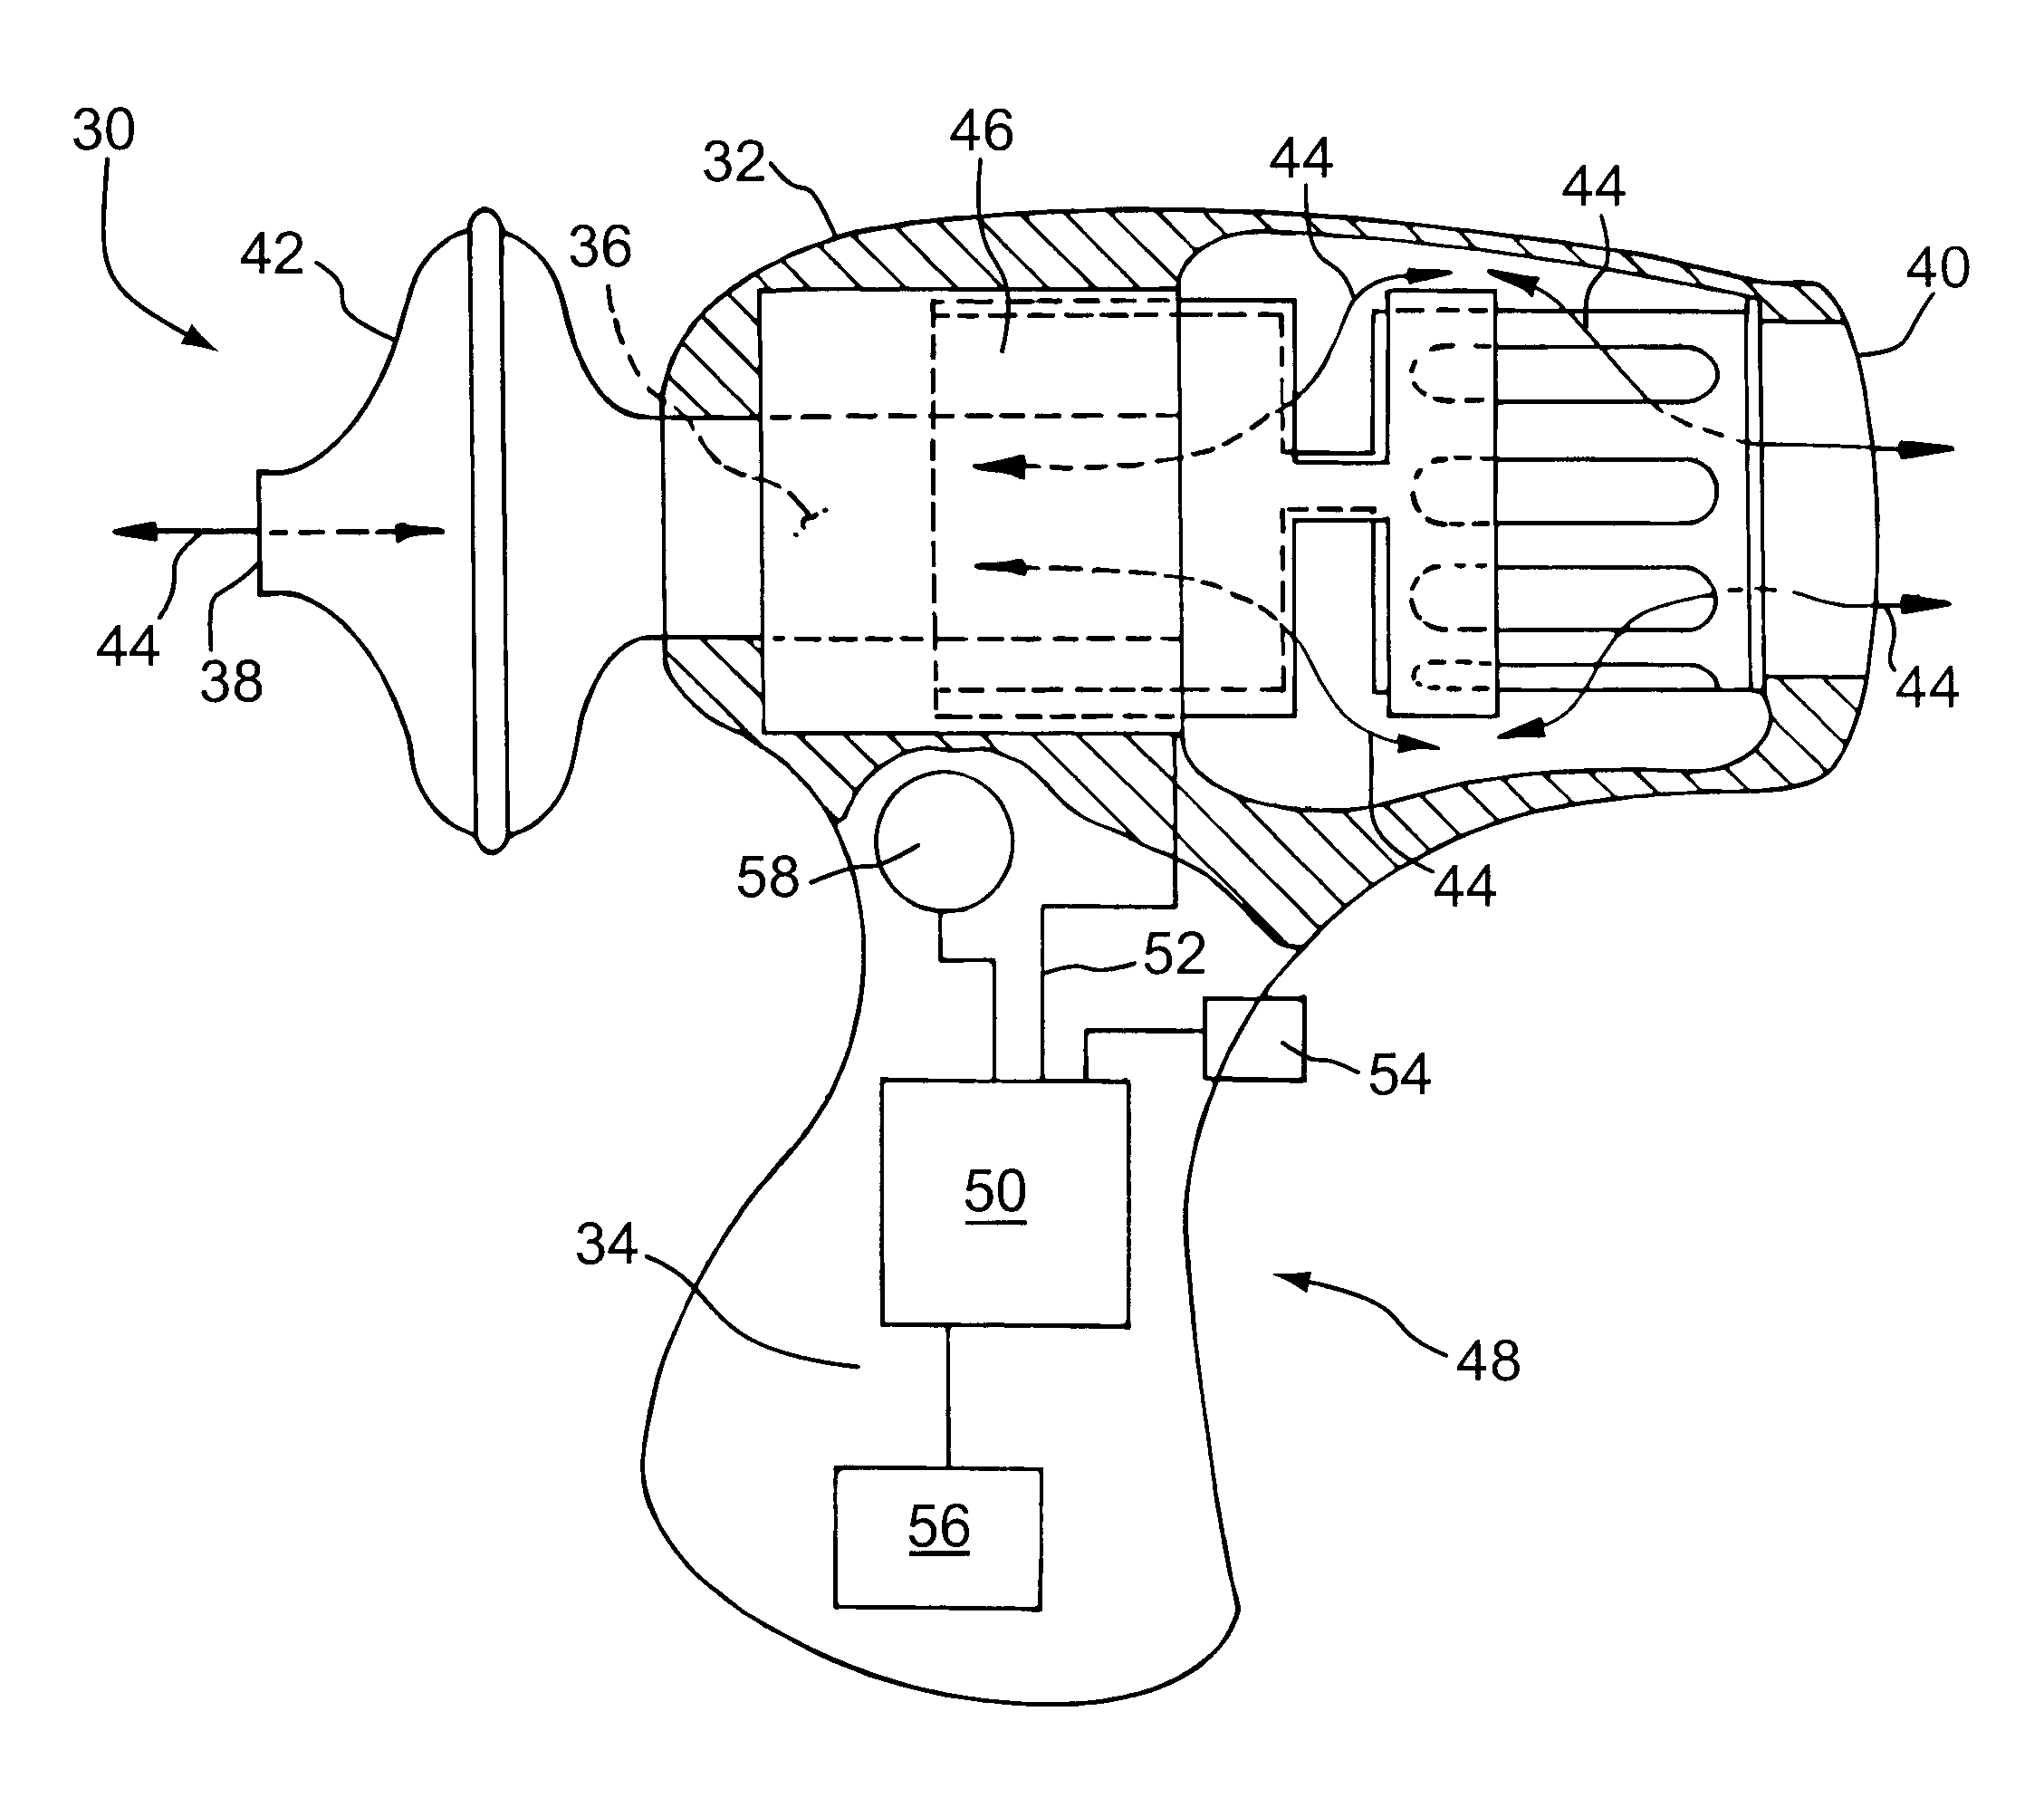 Apparatus and method of providing high frequency variable pressure to a patient